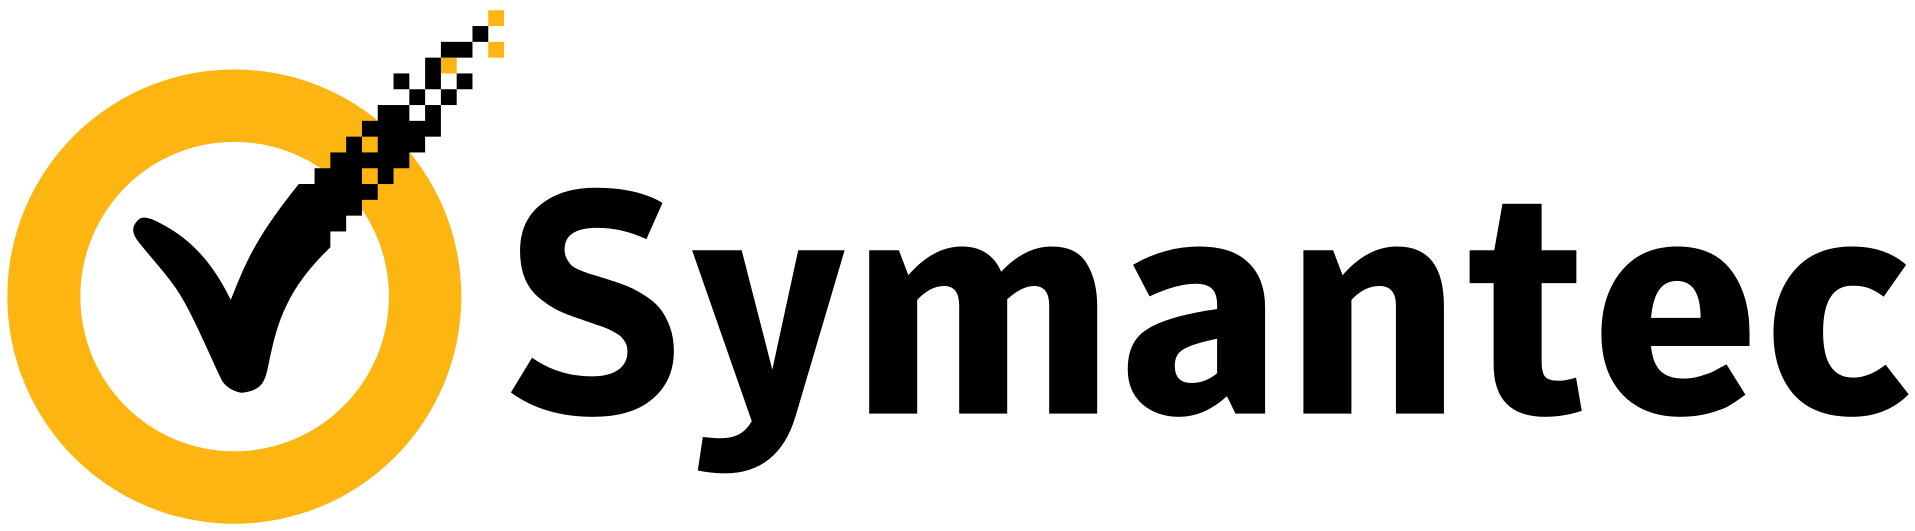 SYMANTEC DEPLOYM SOLUTION FOR CLIENTS WITH REMOTE POWERED ALTIRIS TECHNOLOGY 7.6 XPLAT PER NODE RENEWAL BASIC 12 MONTH ACAD BAND A (GUISXZZ0-BR1A)